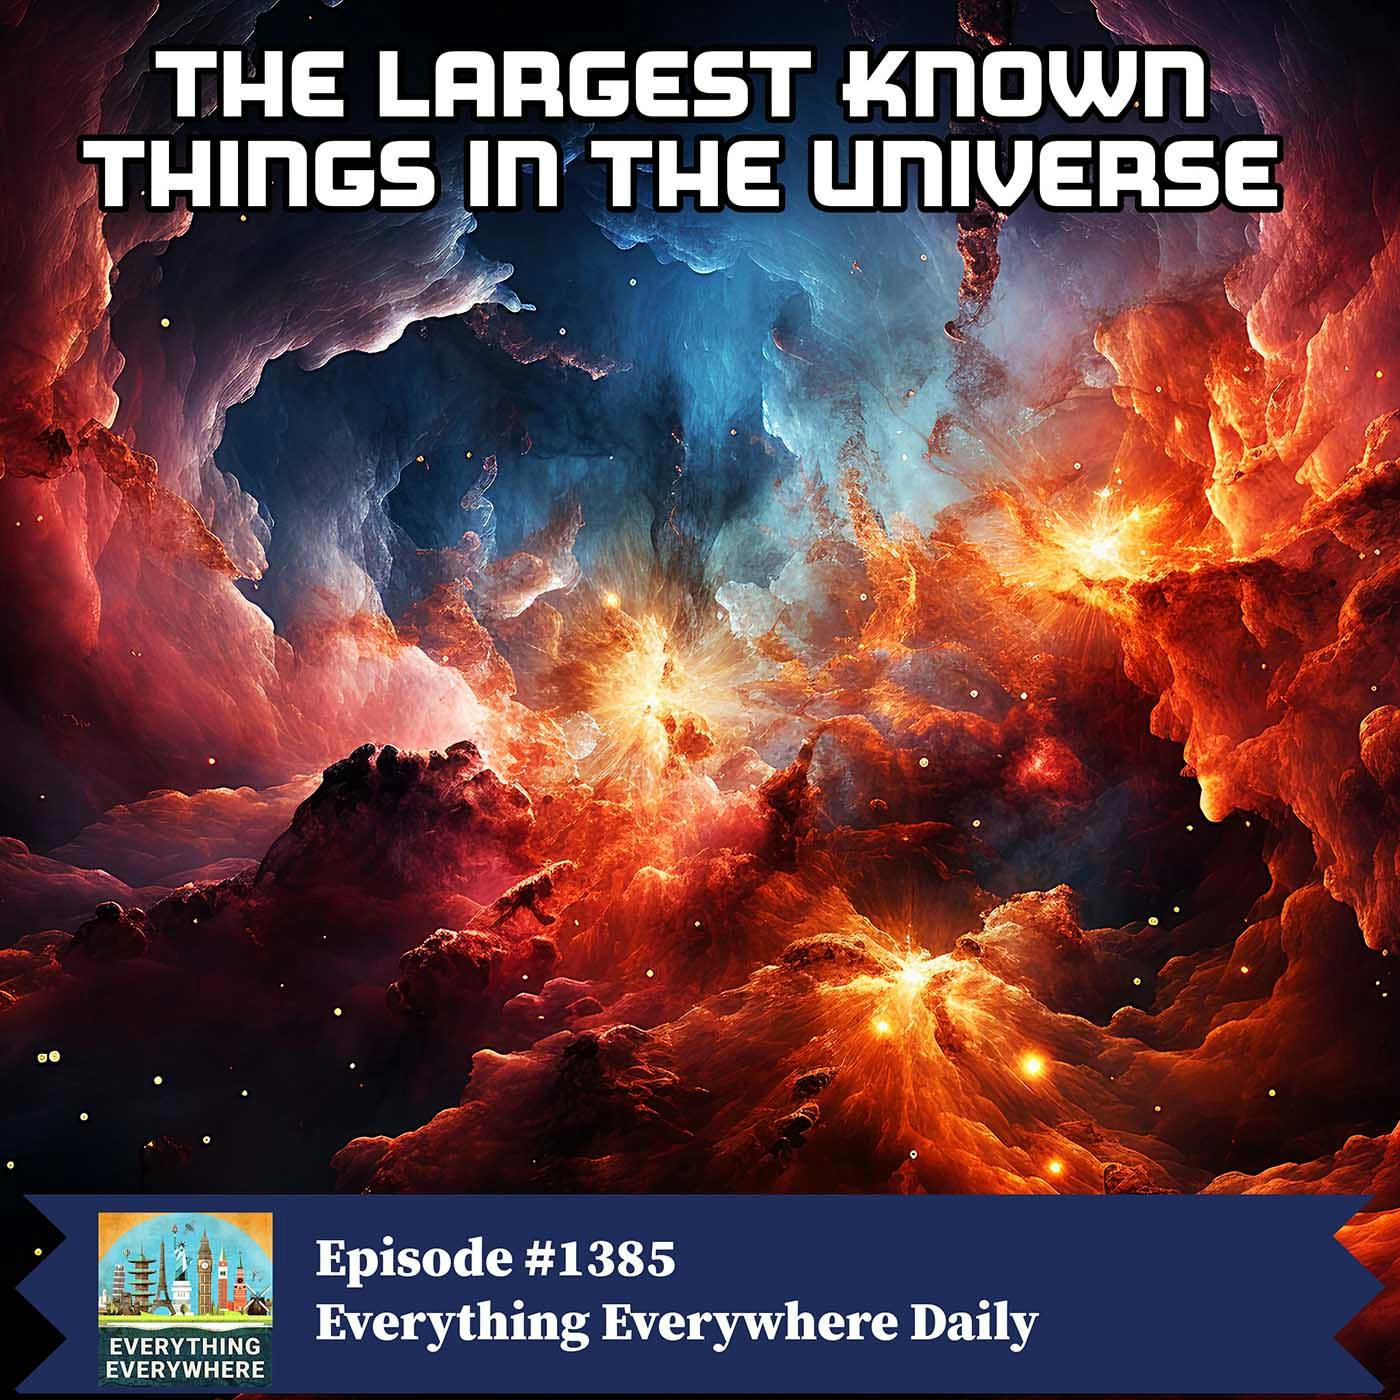 The Largest Known Things in the Universe